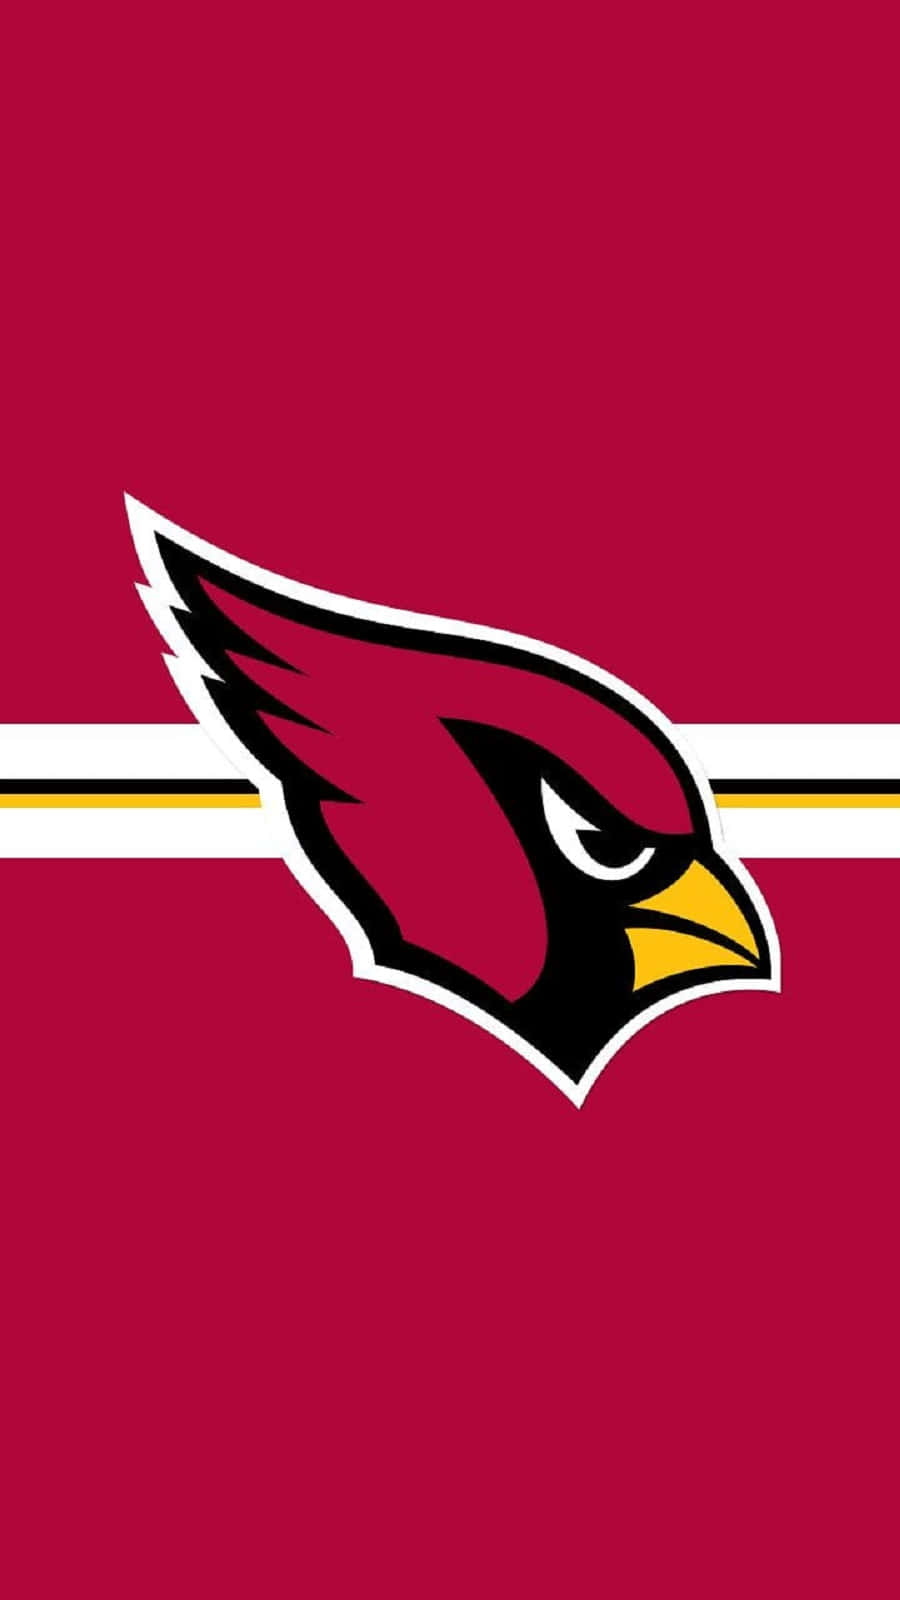 The Arizona Cardinals ready to take on their next opponent